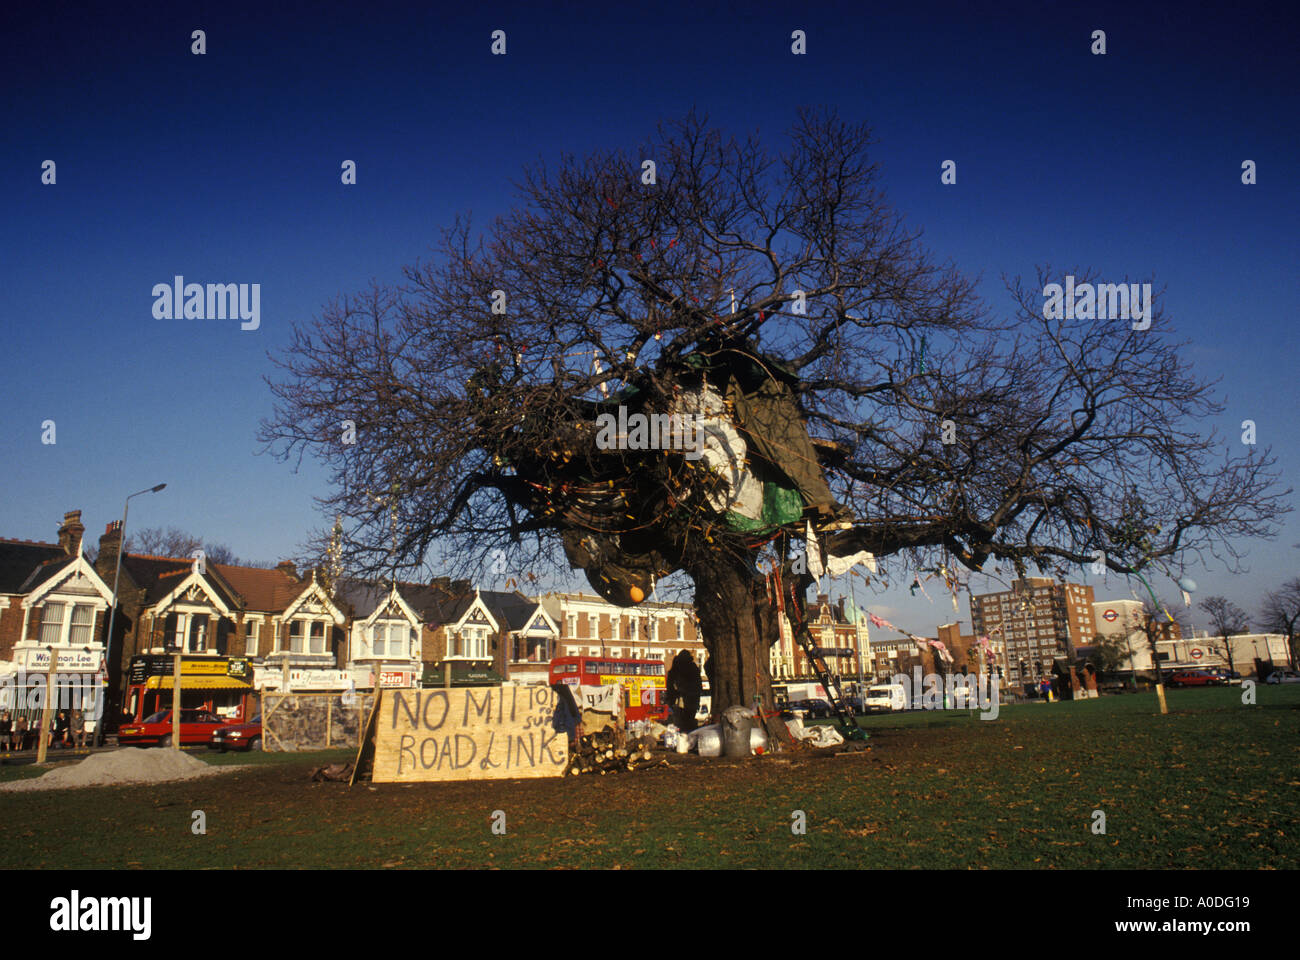 Eco protesters protesting M11 motorway Link Road Protest “George Green” Wanstead East London Chestnut tree cut down London 1993 1990s UK HOMER SYKES Stock Photo